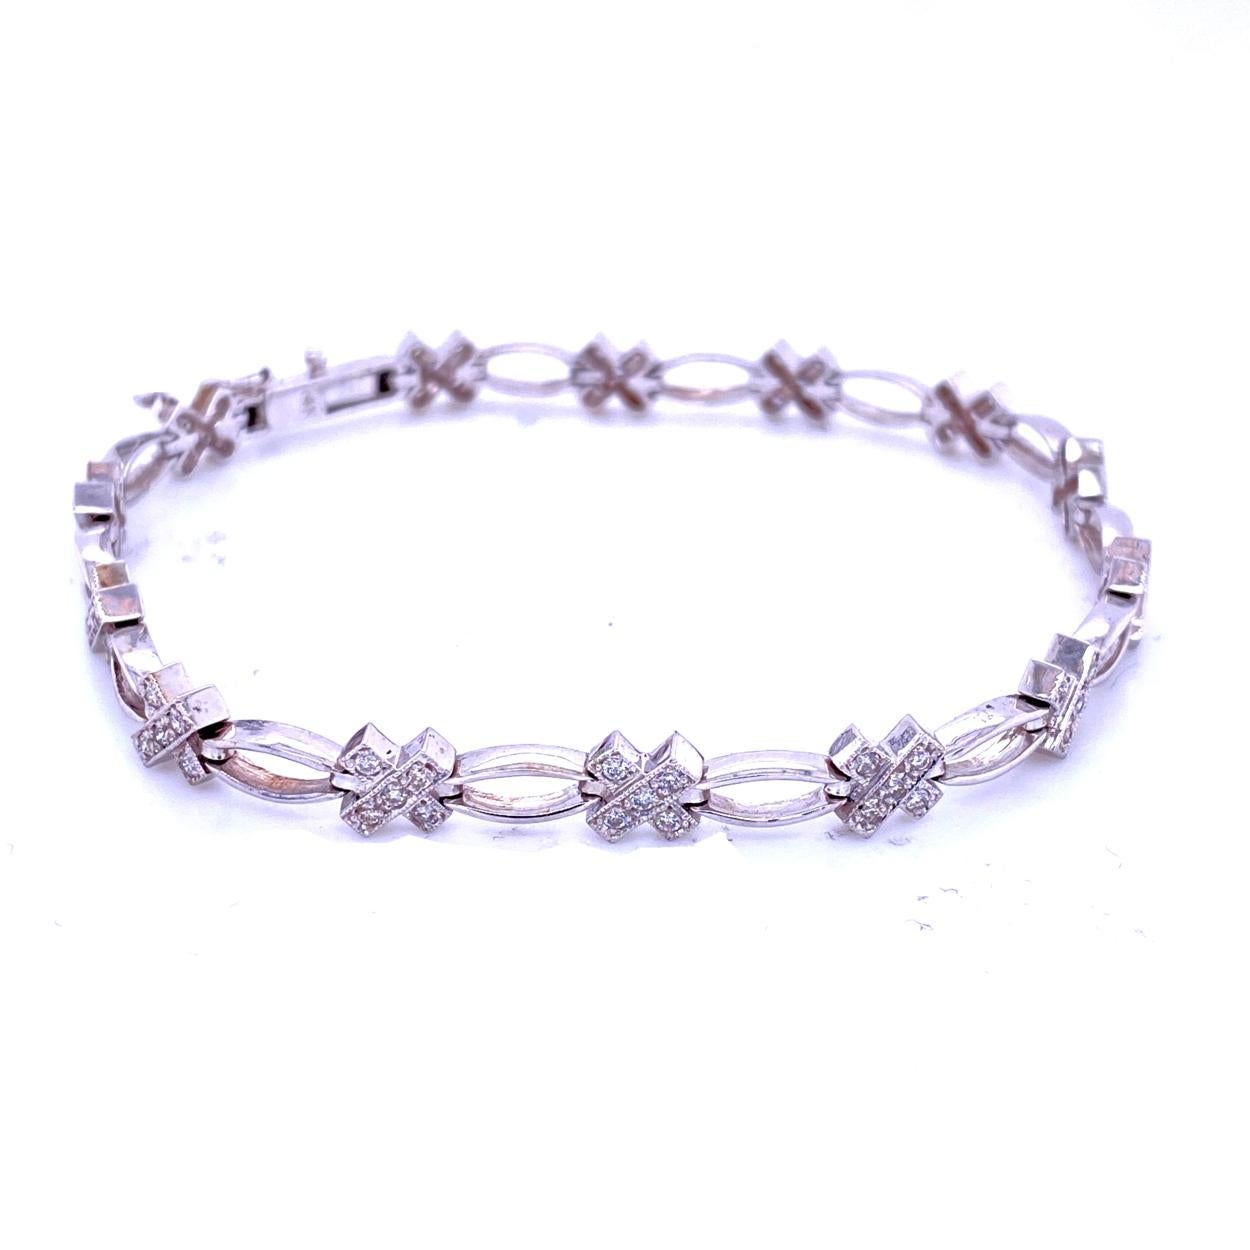 0.63 Carat Pave Set Round Diamond 14 Karat Gold Tennis Bracelet In New Condition For Sale In Los Angeles, CA